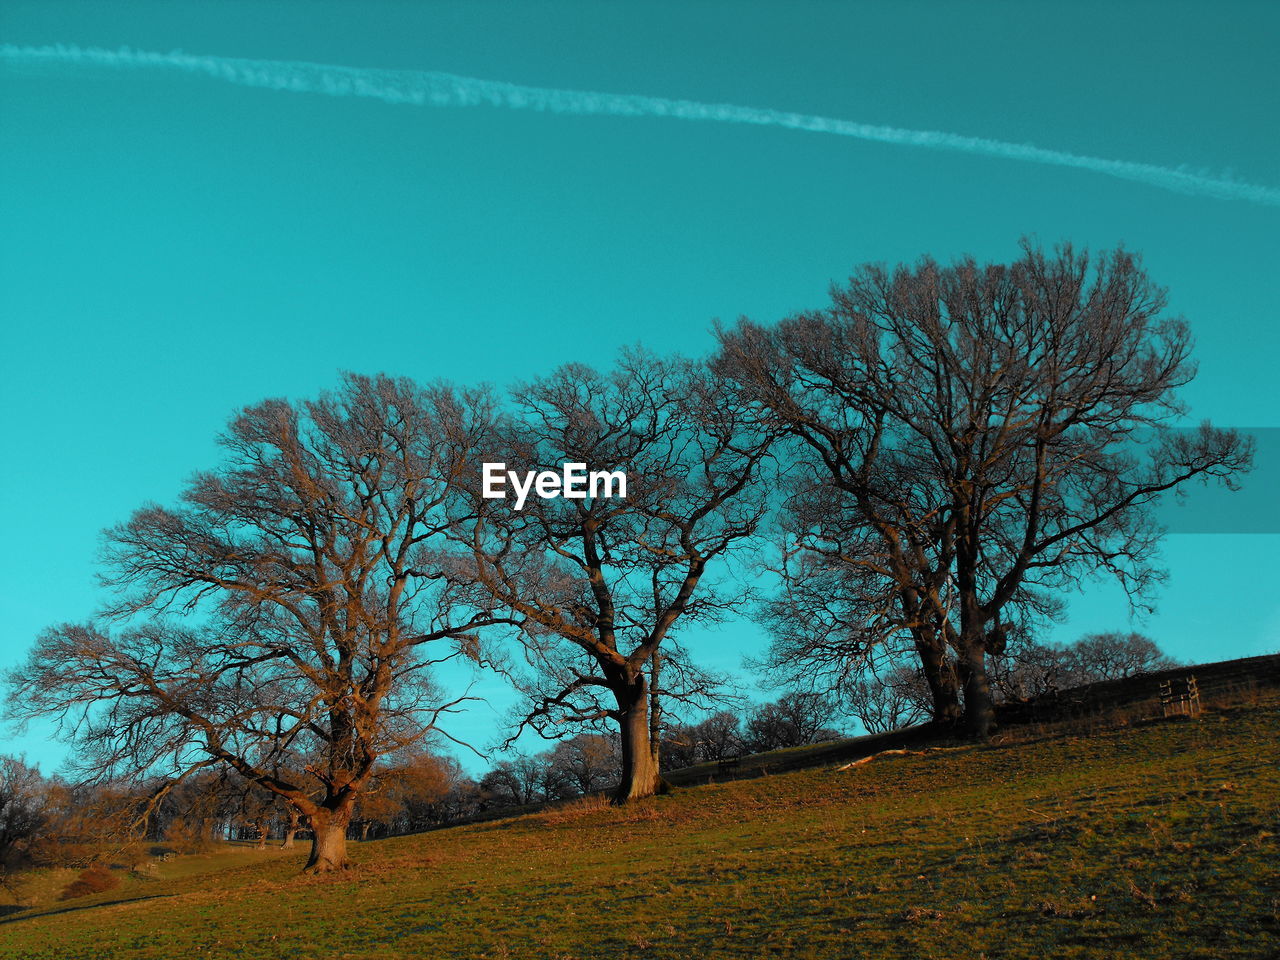 VIEW OF BARE TREES ON LANDSCAPE AGAINST BLUE SKY